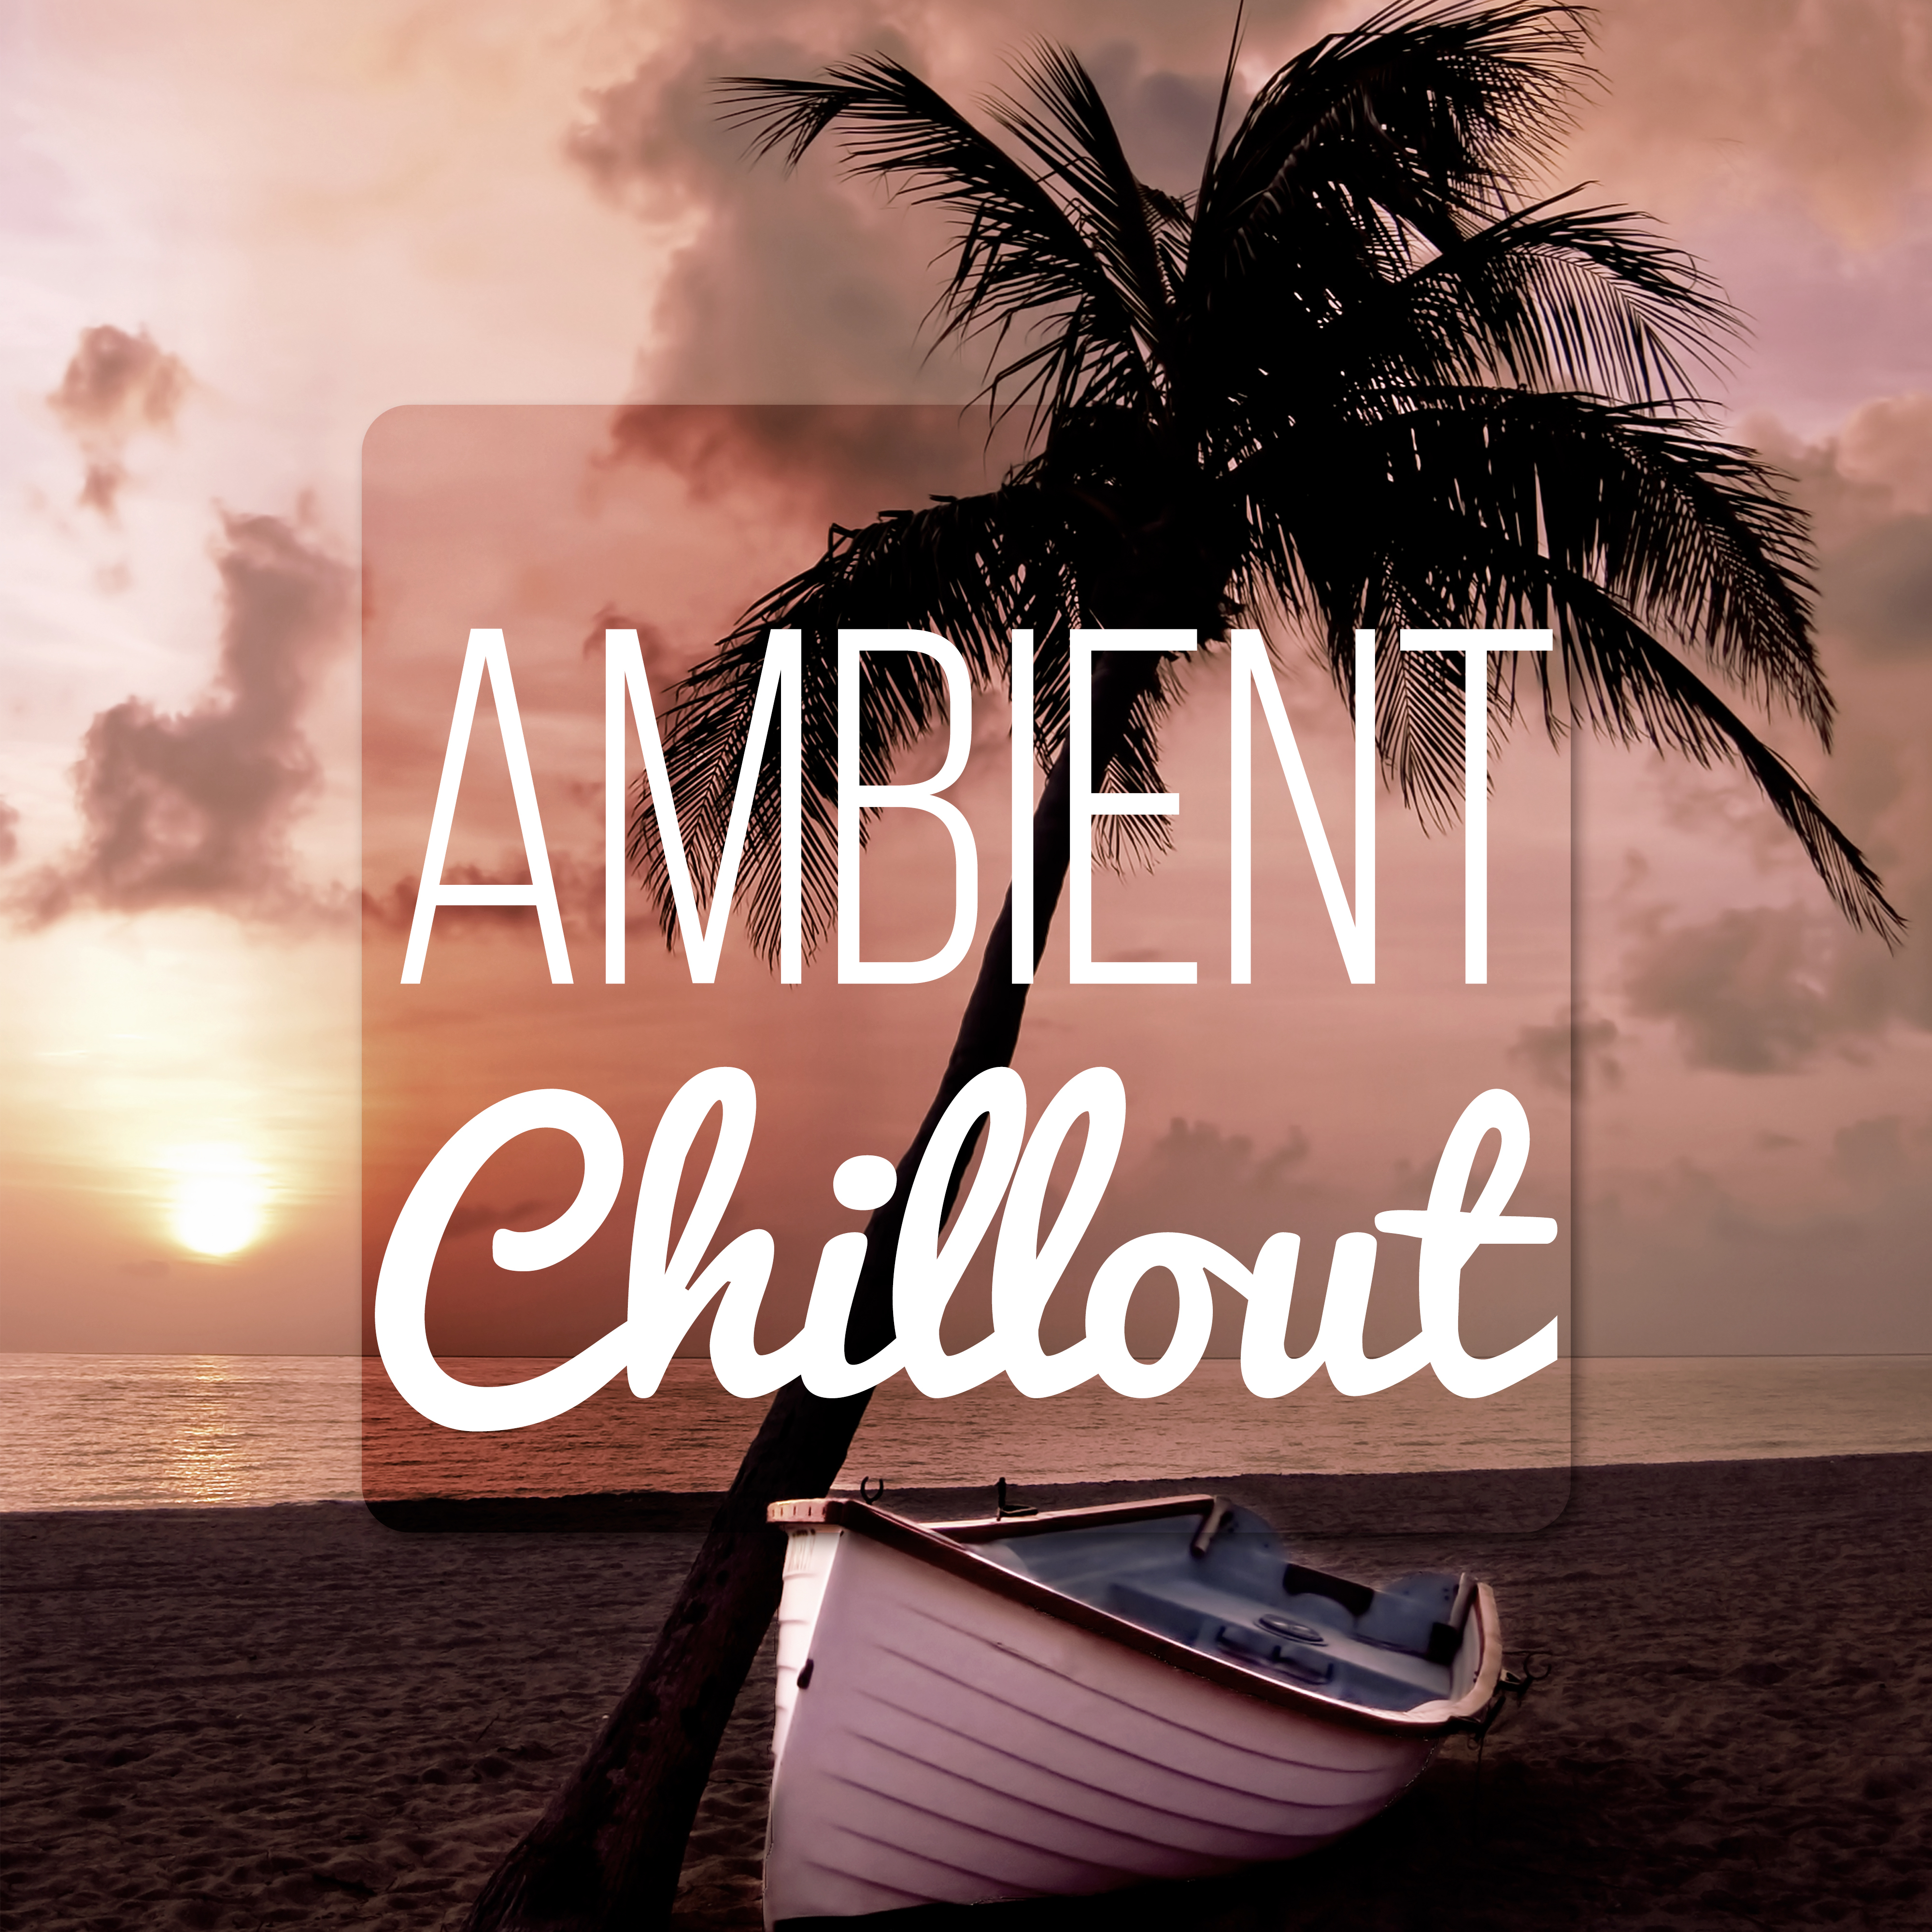 Ambient Chillout - The Best Chill Lounge Music, Beach Party, Cocktail Party, Relax, Summer Party, Tropical Party, Easy Going, My Night, Dubai Hotel